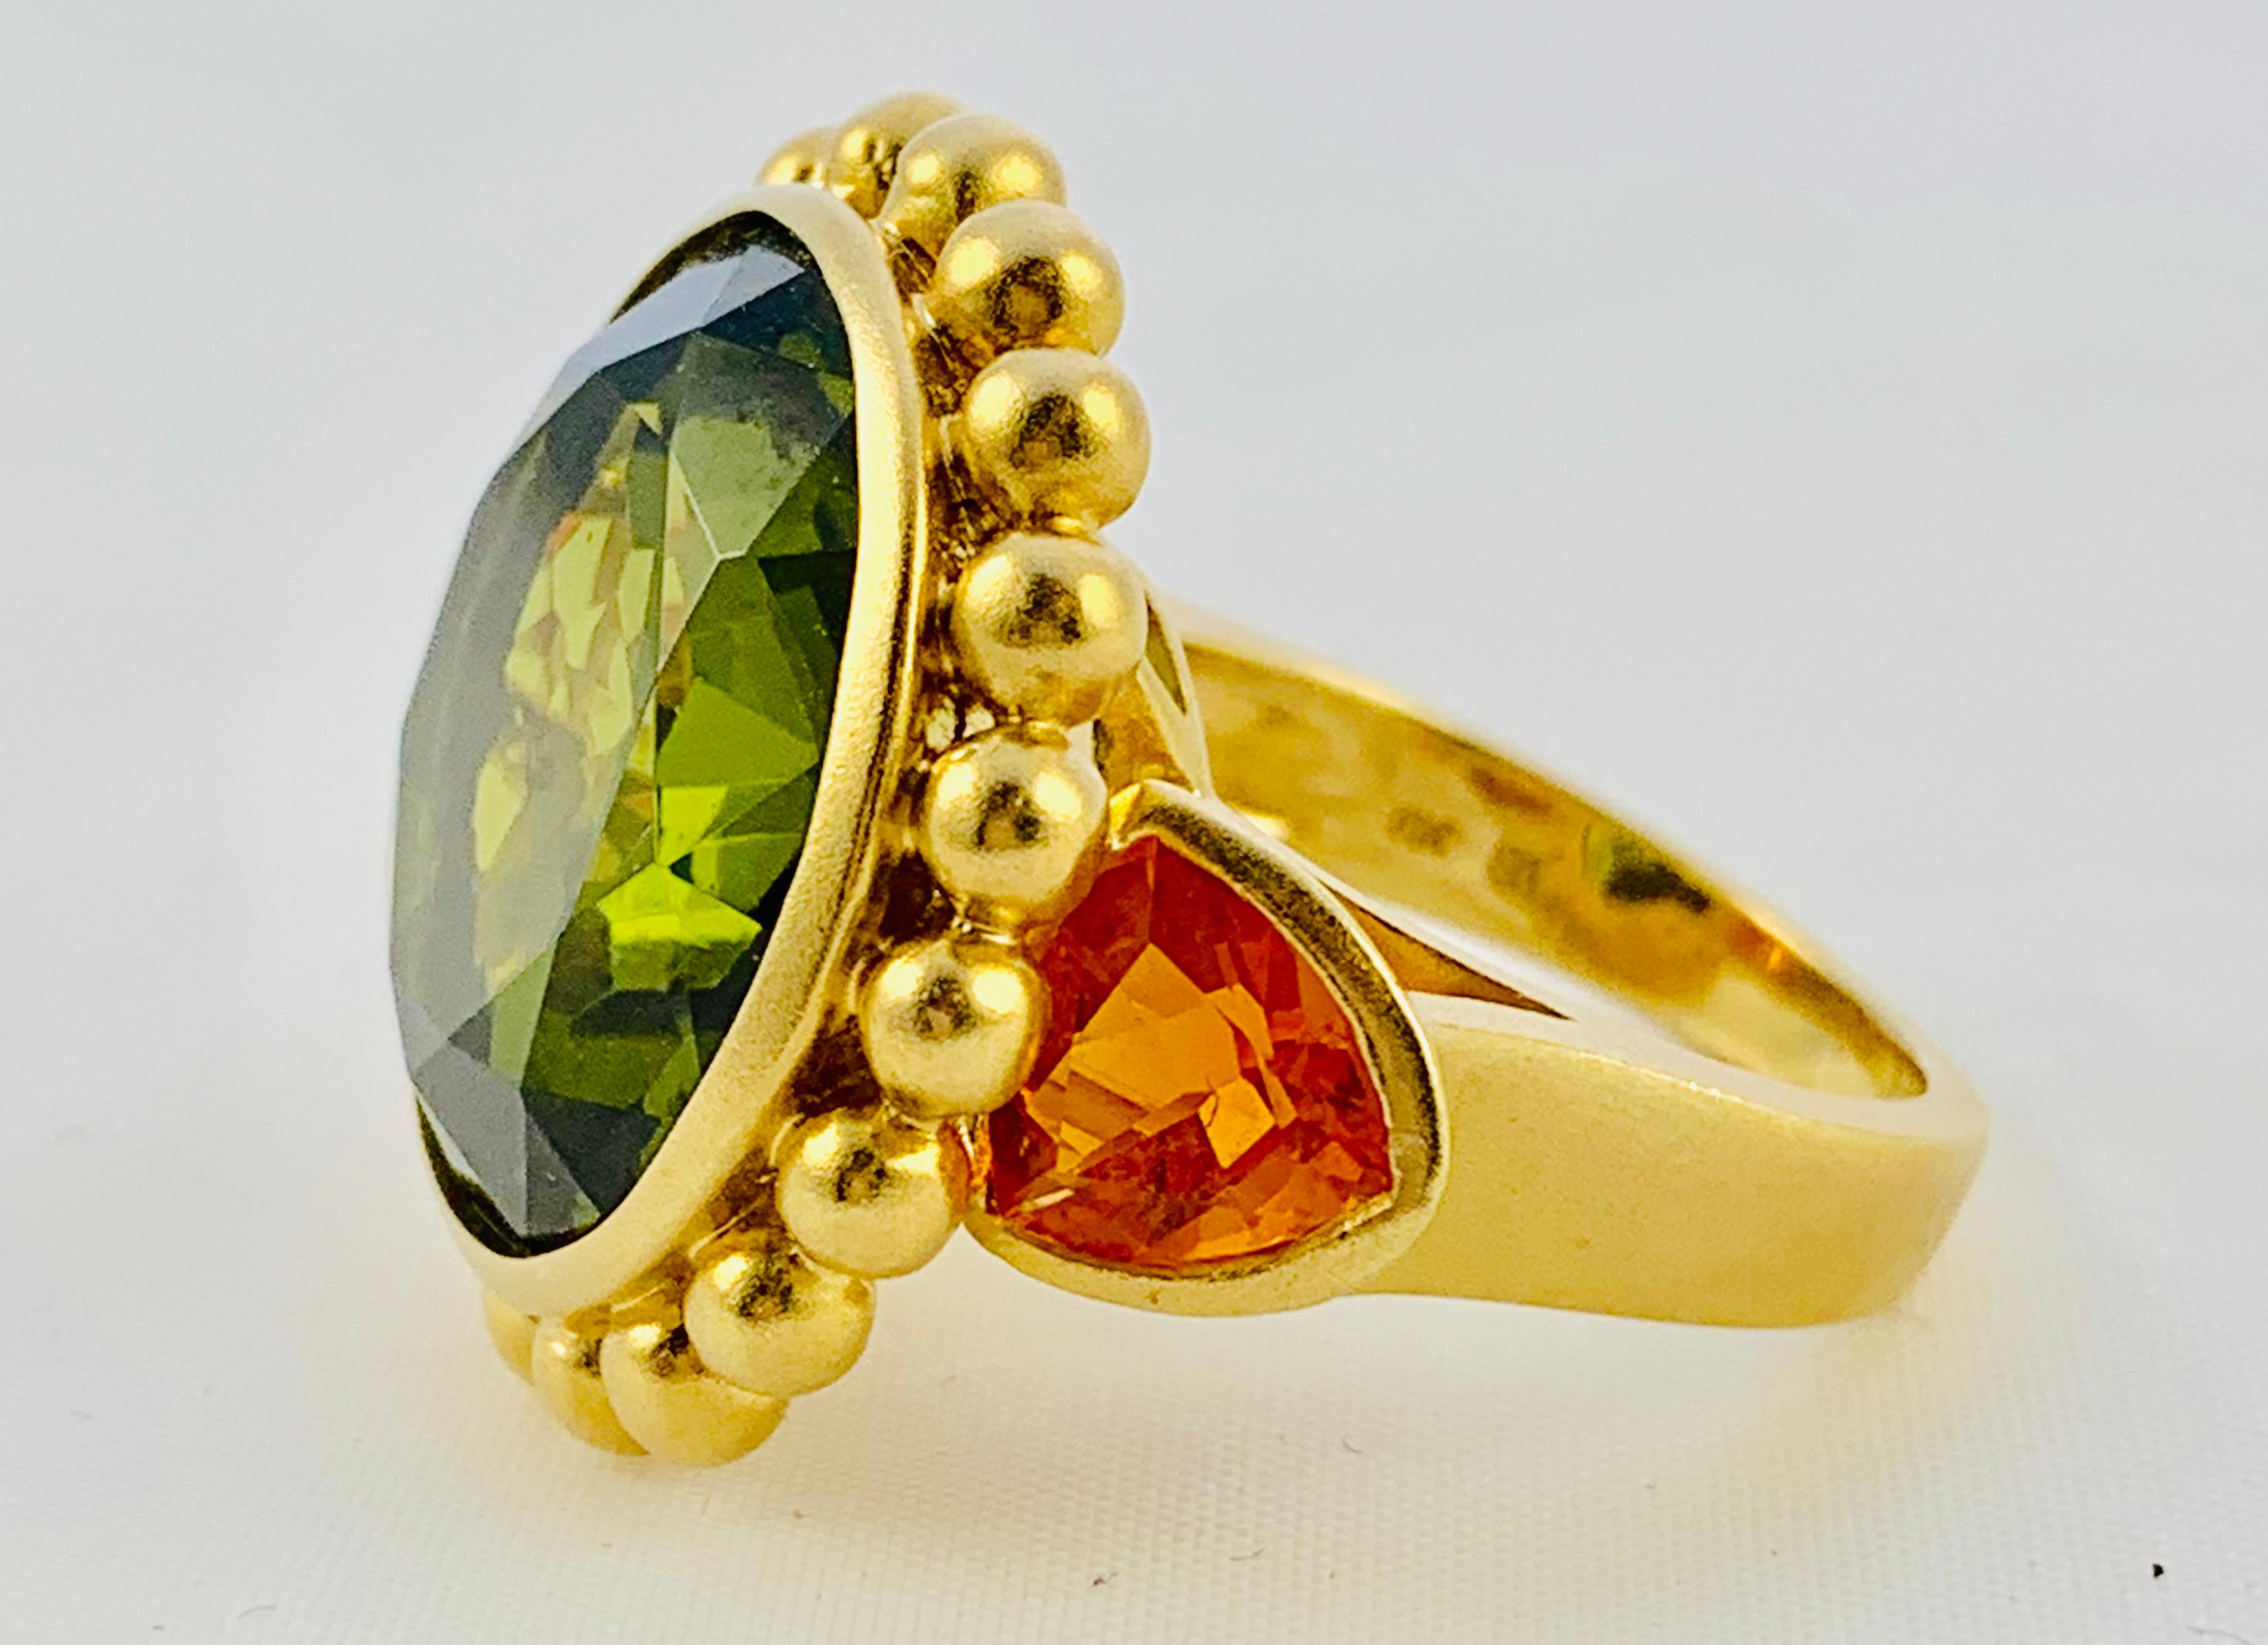 This Ring is an absolute show stopper! Designed by Barry Brinker, it is made in 18K yellow Gold and features a Single, Round, 18mm Peridot that is flanked by two, 7.3mm Orange Sapphires! The retail price on this ring is $7000. It weighs 20.5 grams